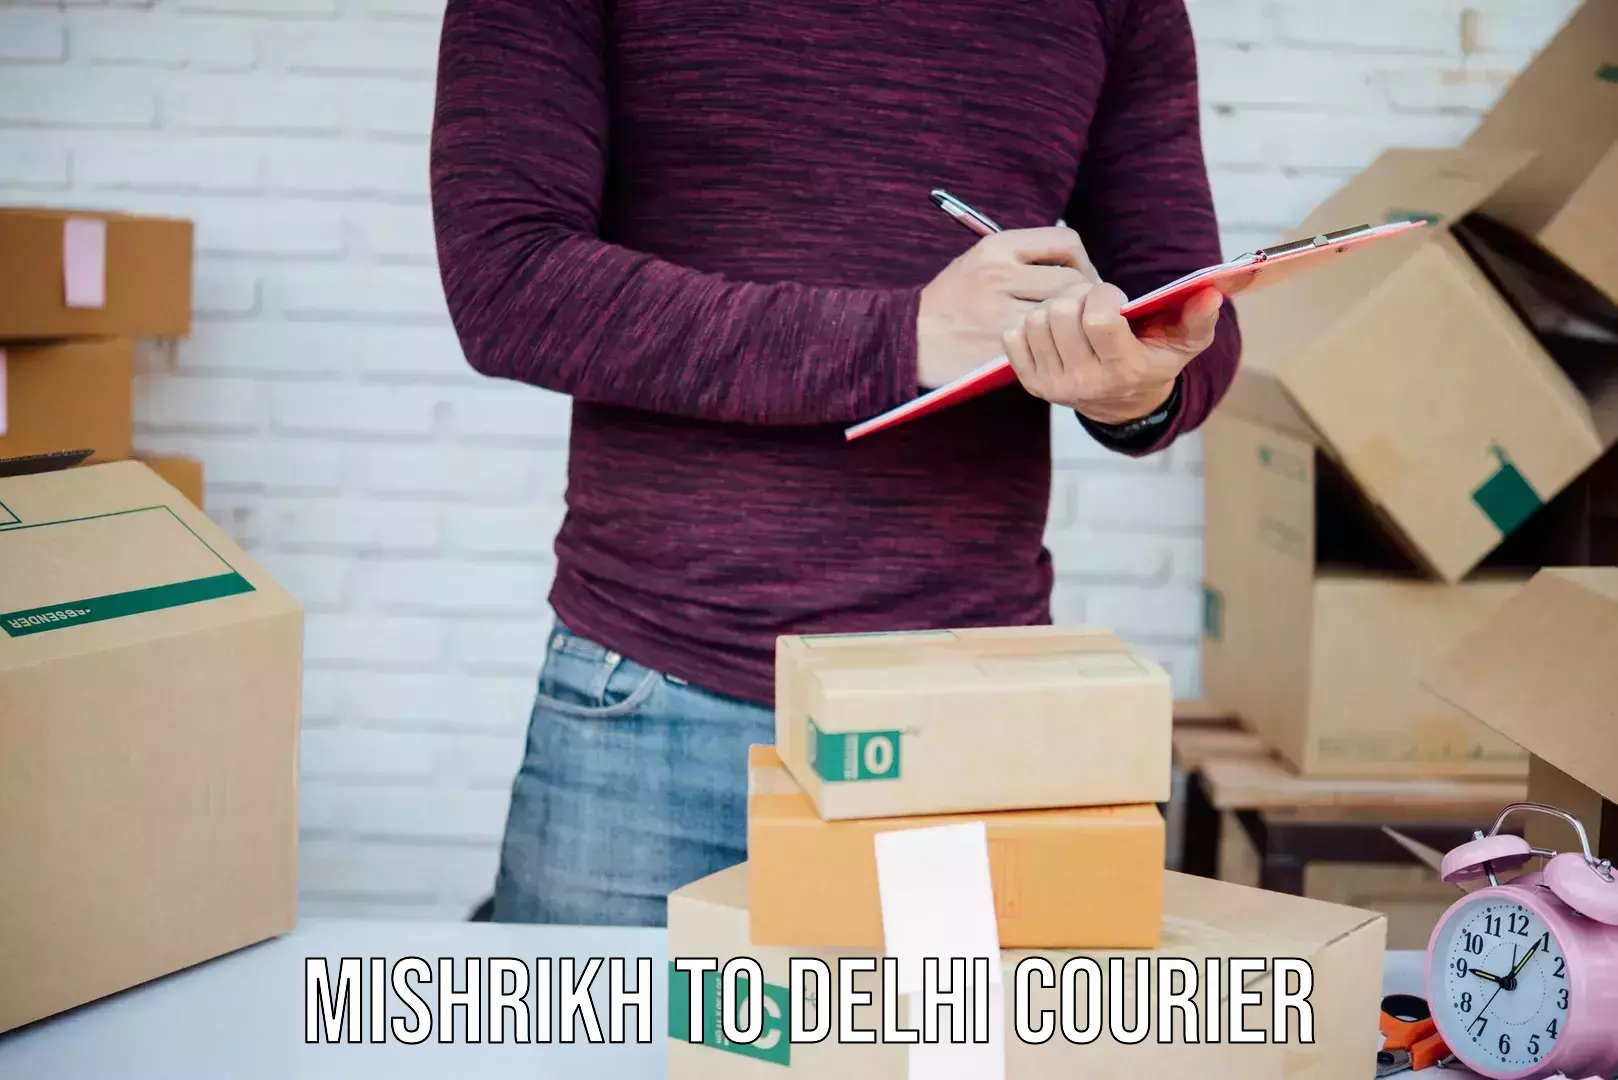 Courier service partnerships Mishrikh to Lodhi Road